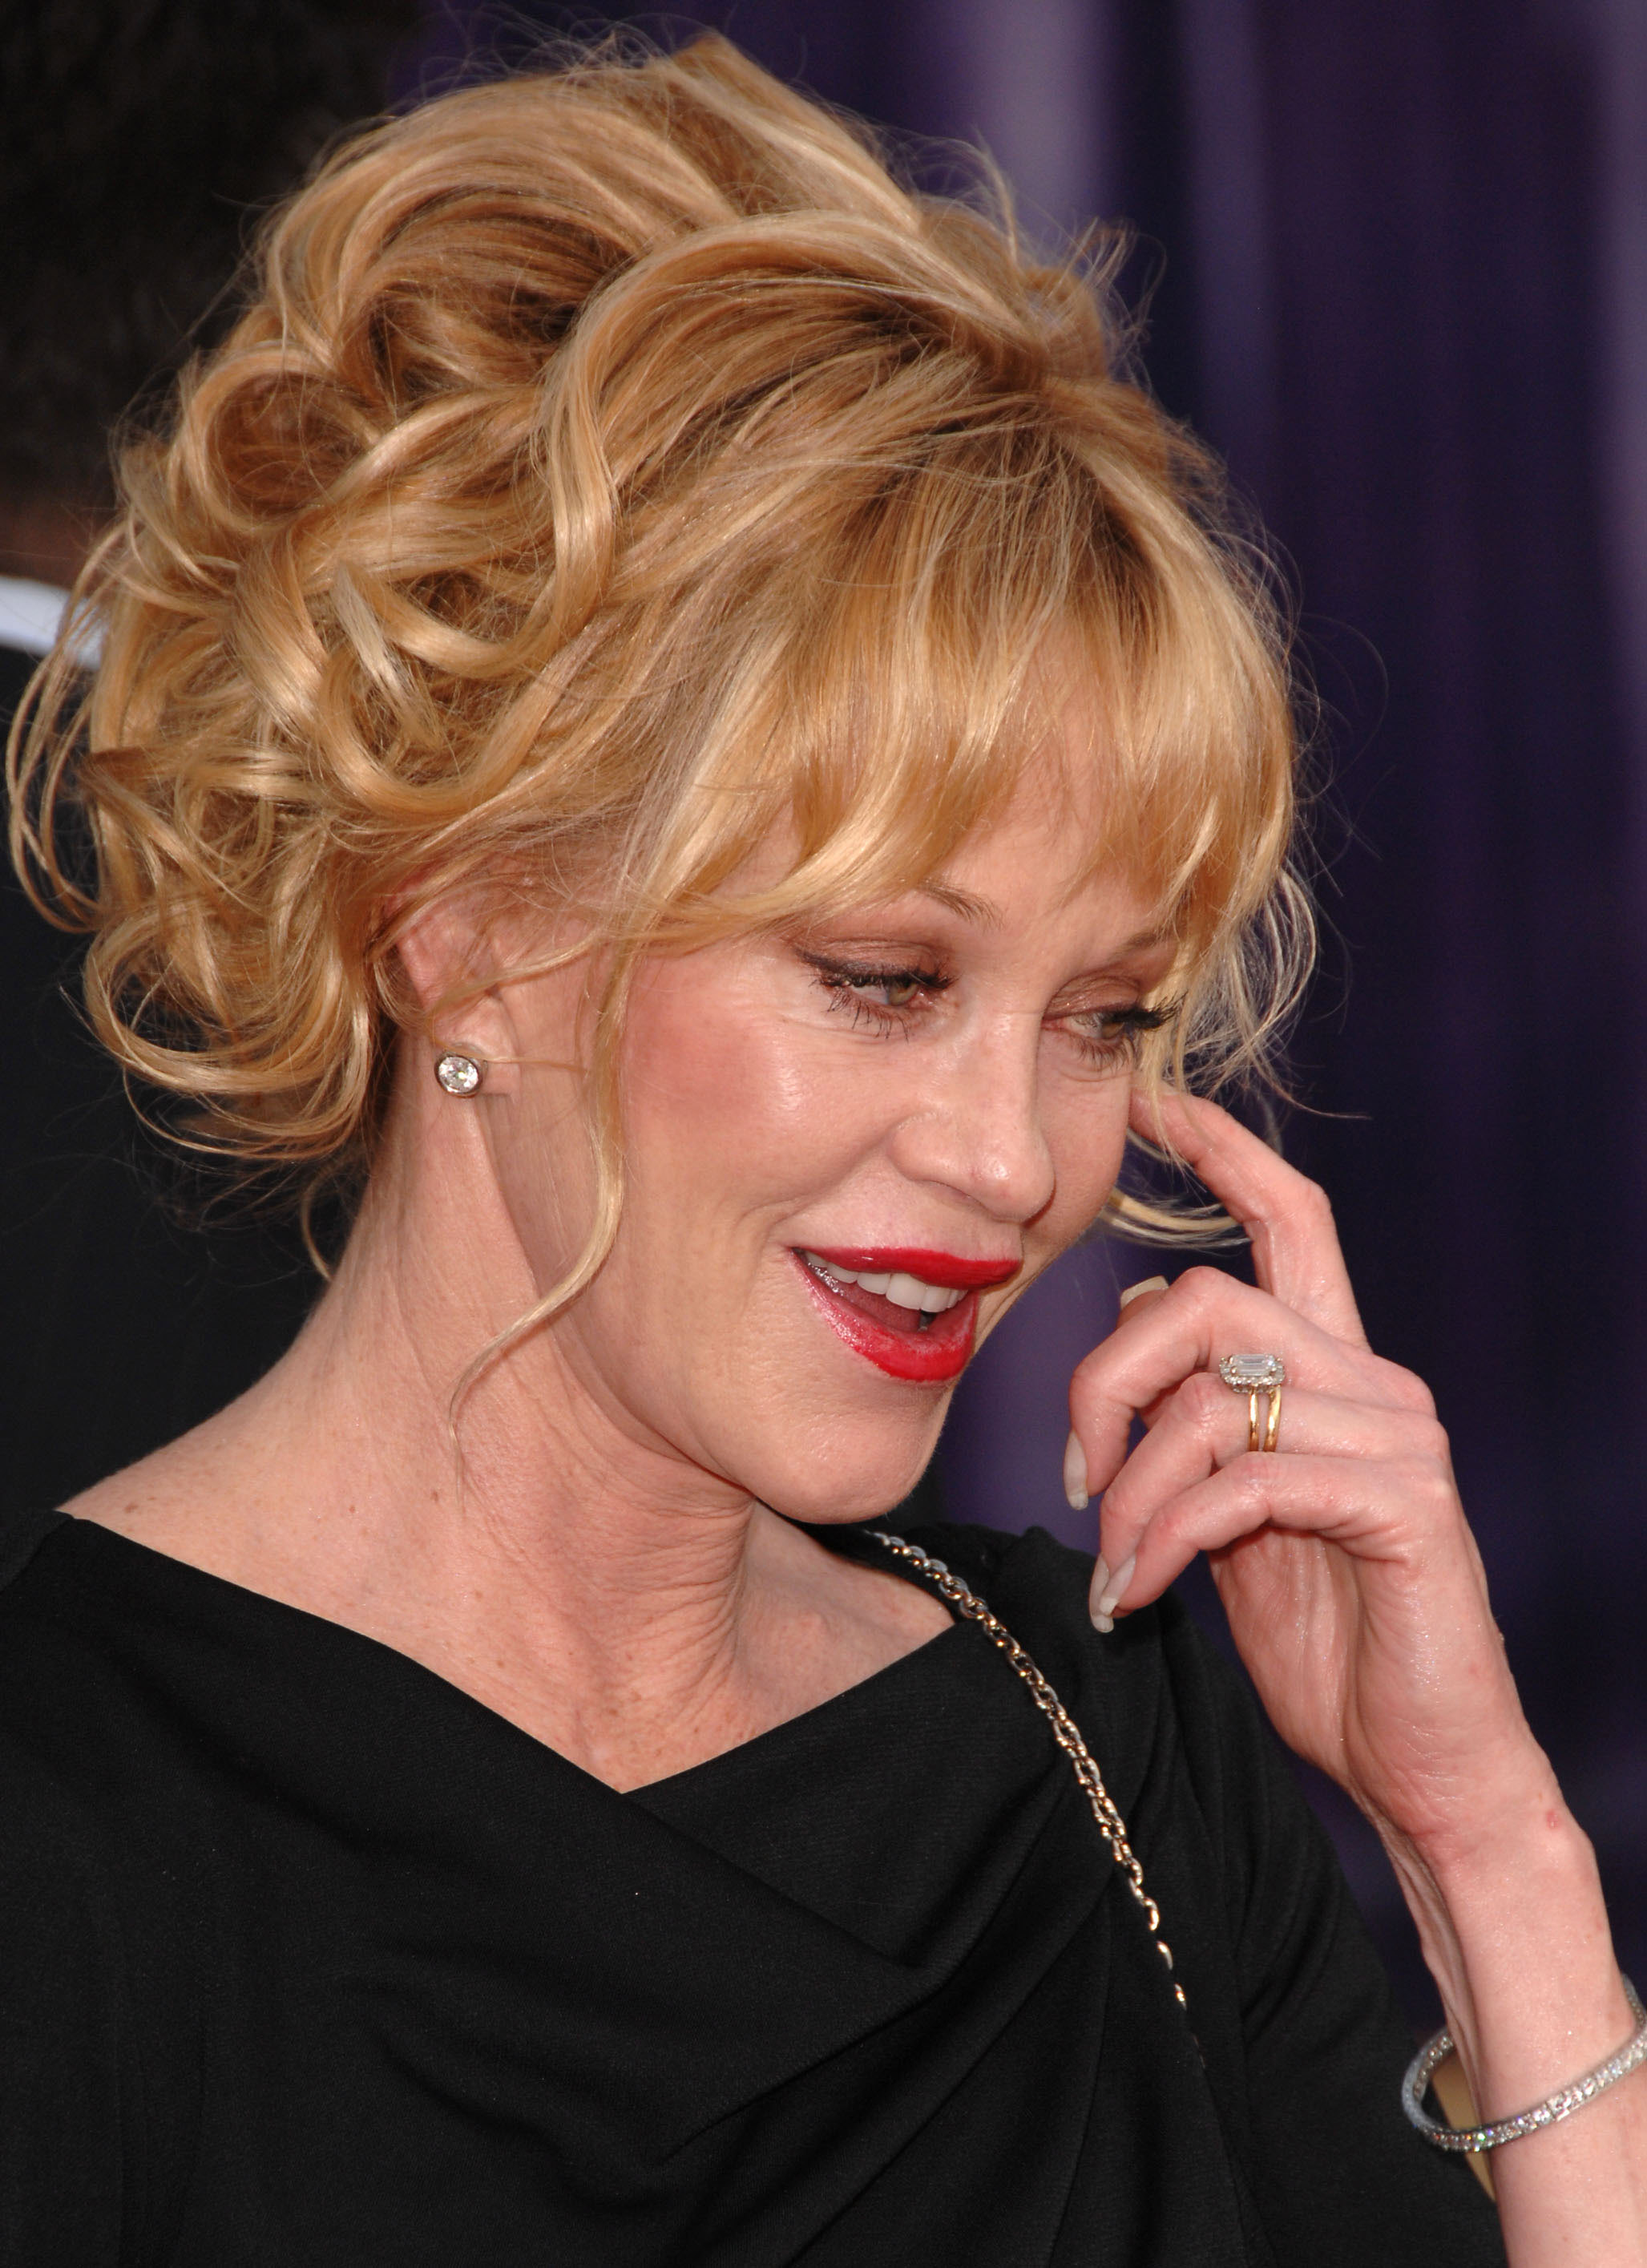 Melanie Griffith on June 11, 2009 in Culver City, California. | Source: Getty Images